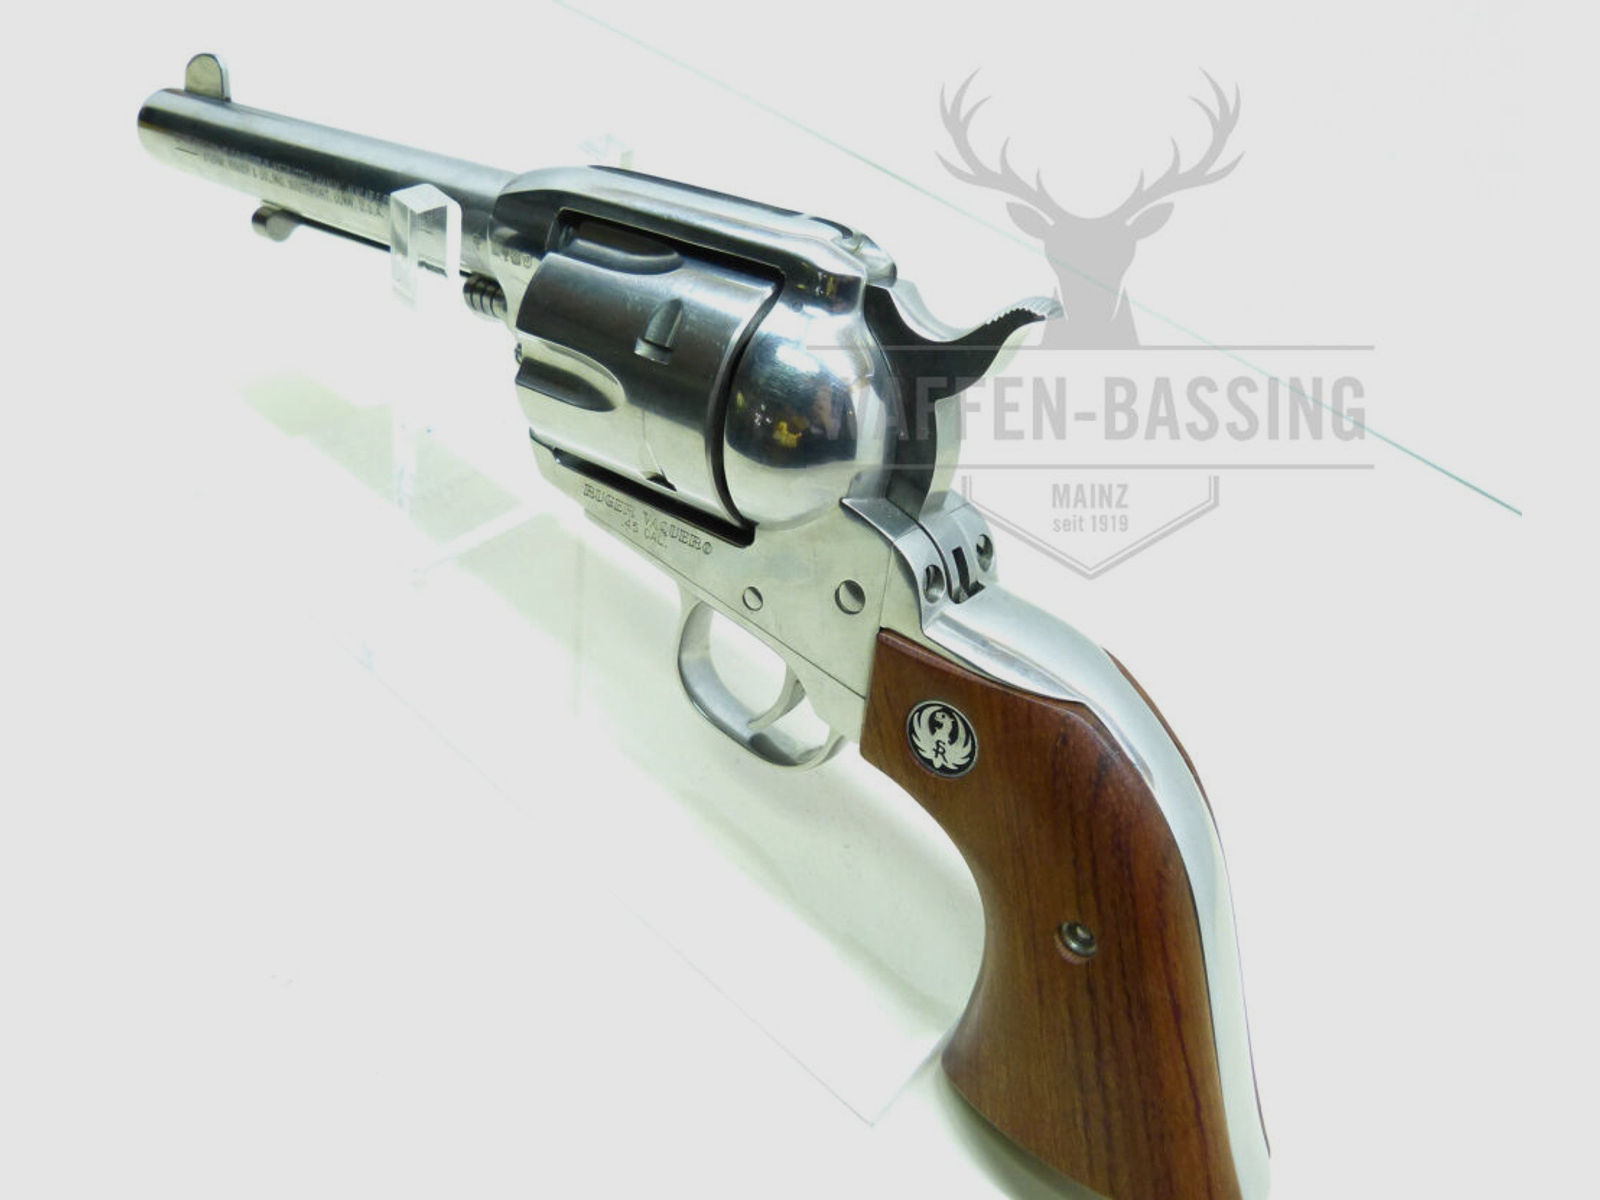 Ruger	 Vaquero Stainless